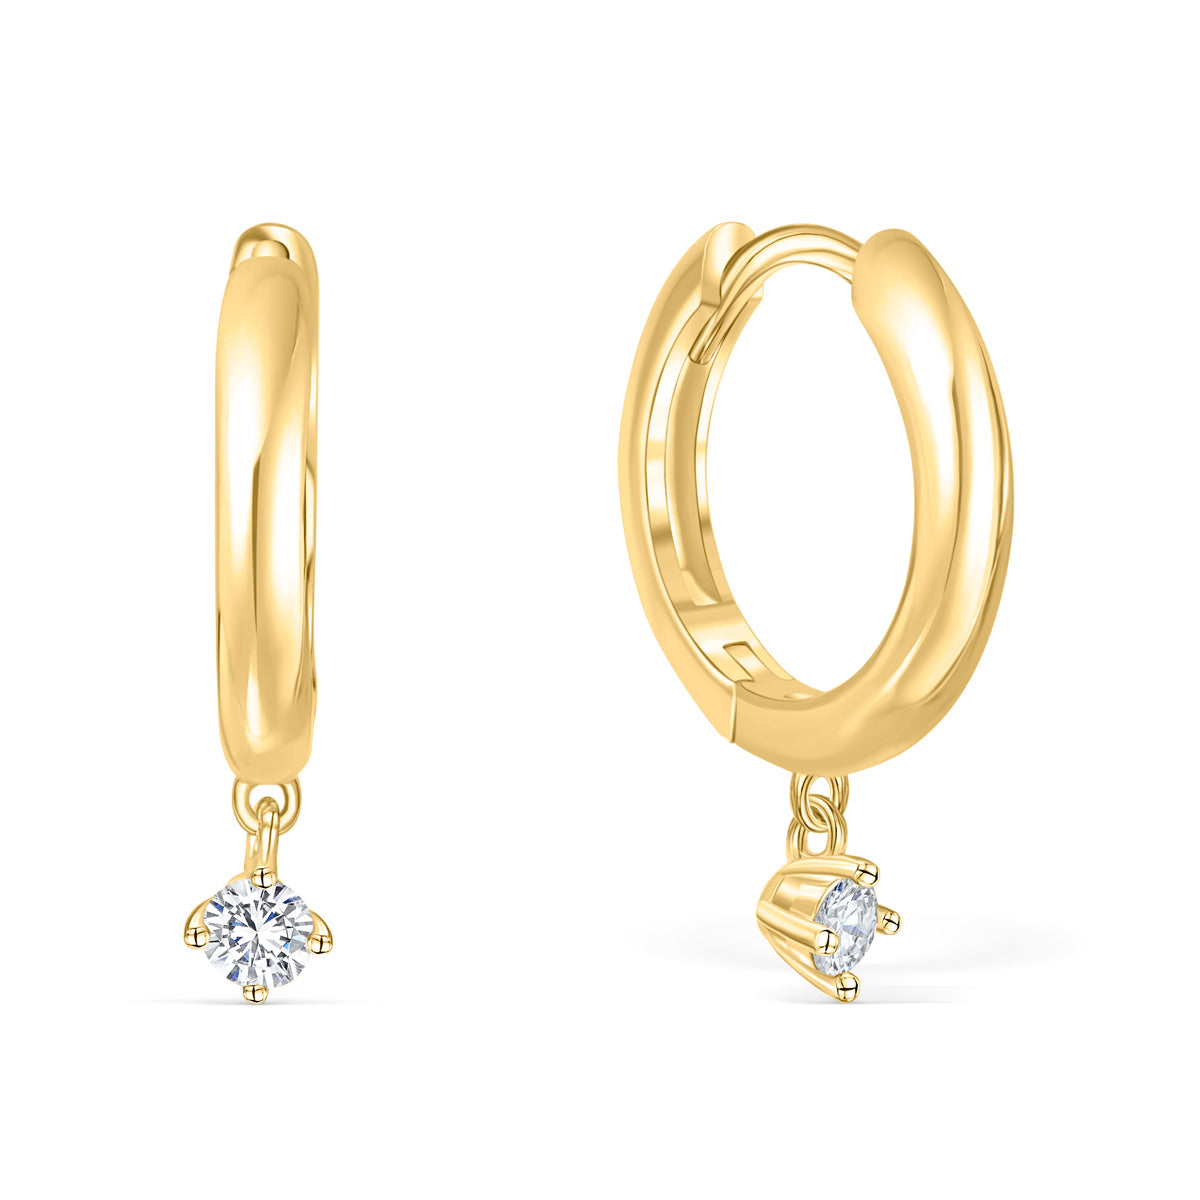 Gold huggie earrings with round stone